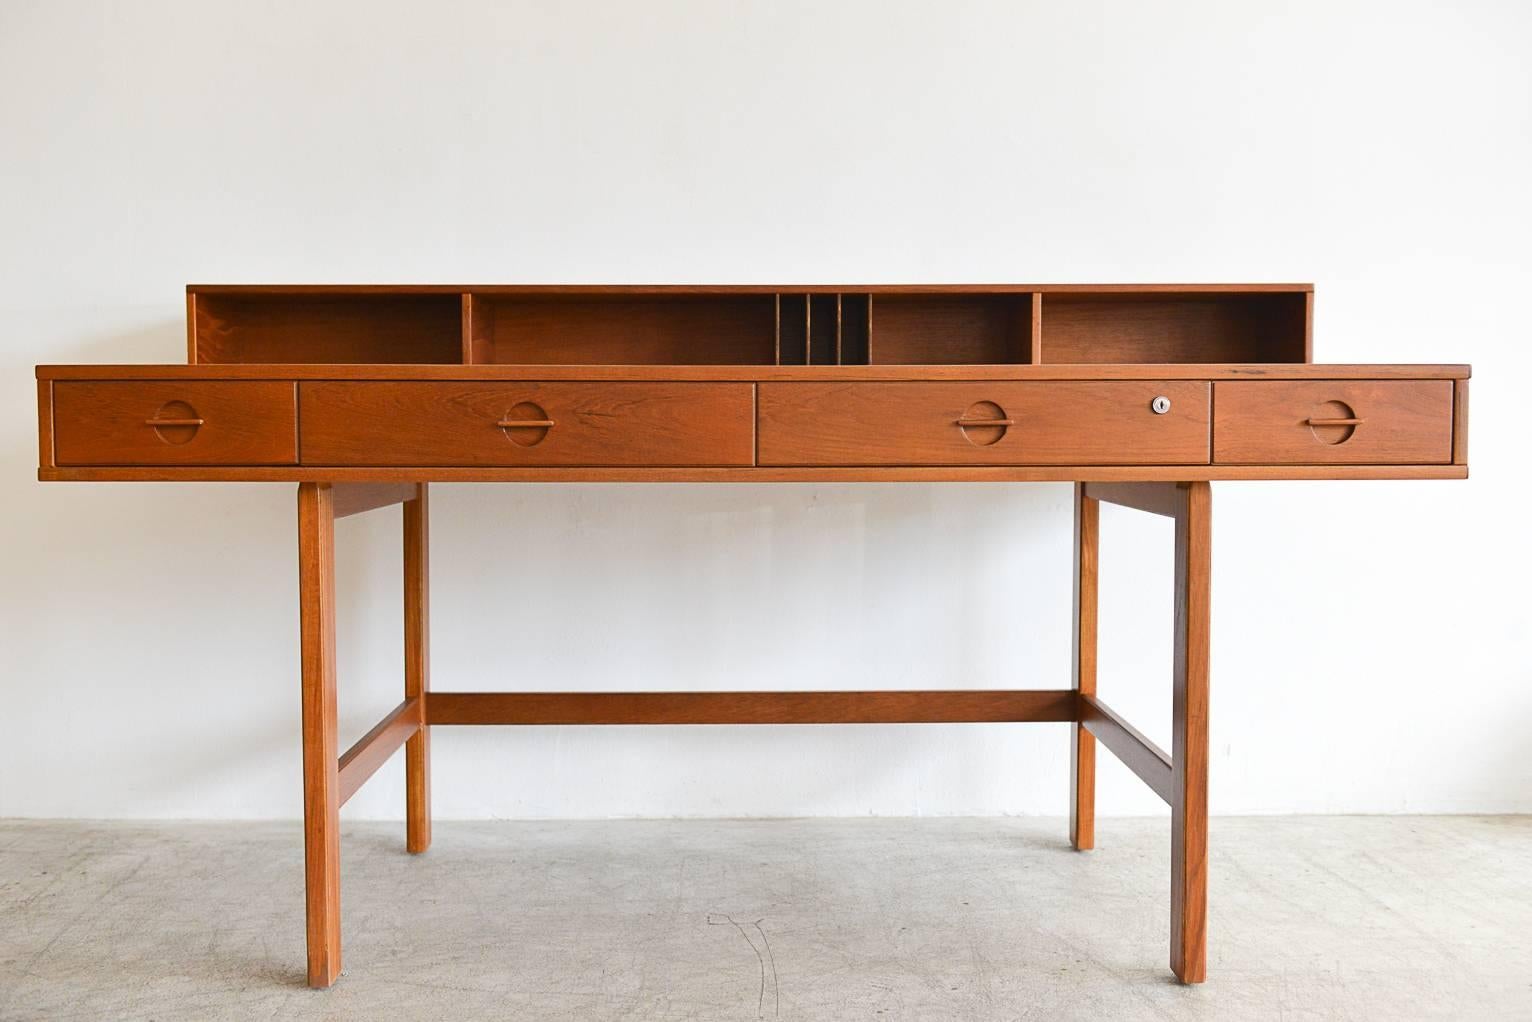 Fully restored beautiful Danish modern Teak flip-top partner’s desk by Jens Quistgaard for Peter Løvig Nielsen. Beautiful sculpted pulls and unique flip-top shelf flips down to extend the desk for more working space and can be used as a partner’s